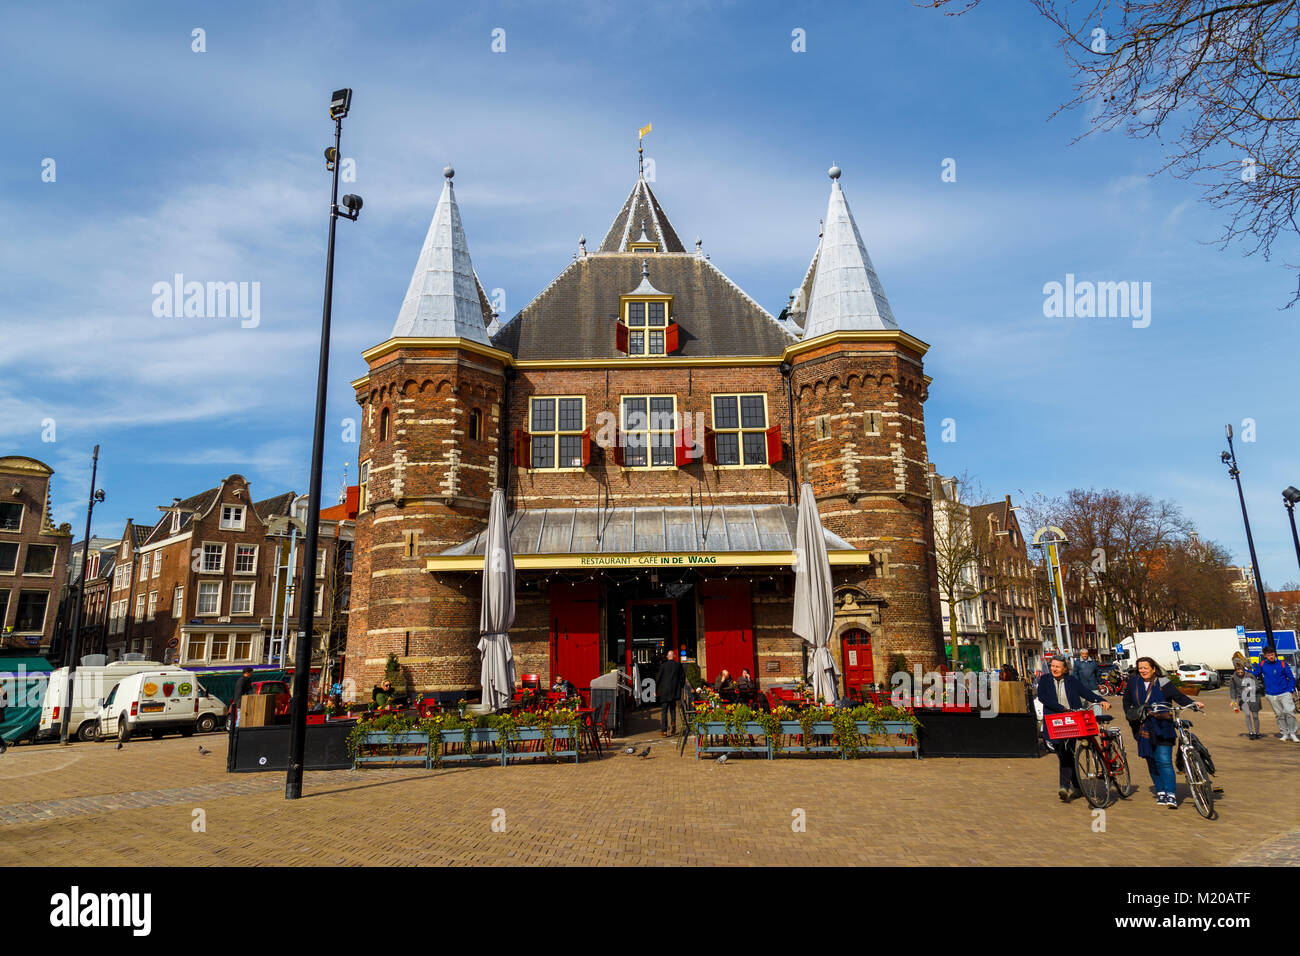 Amsterdam, March 17, 2017: Viev of The Waag where the trade center of Amsterdam Stock Photo